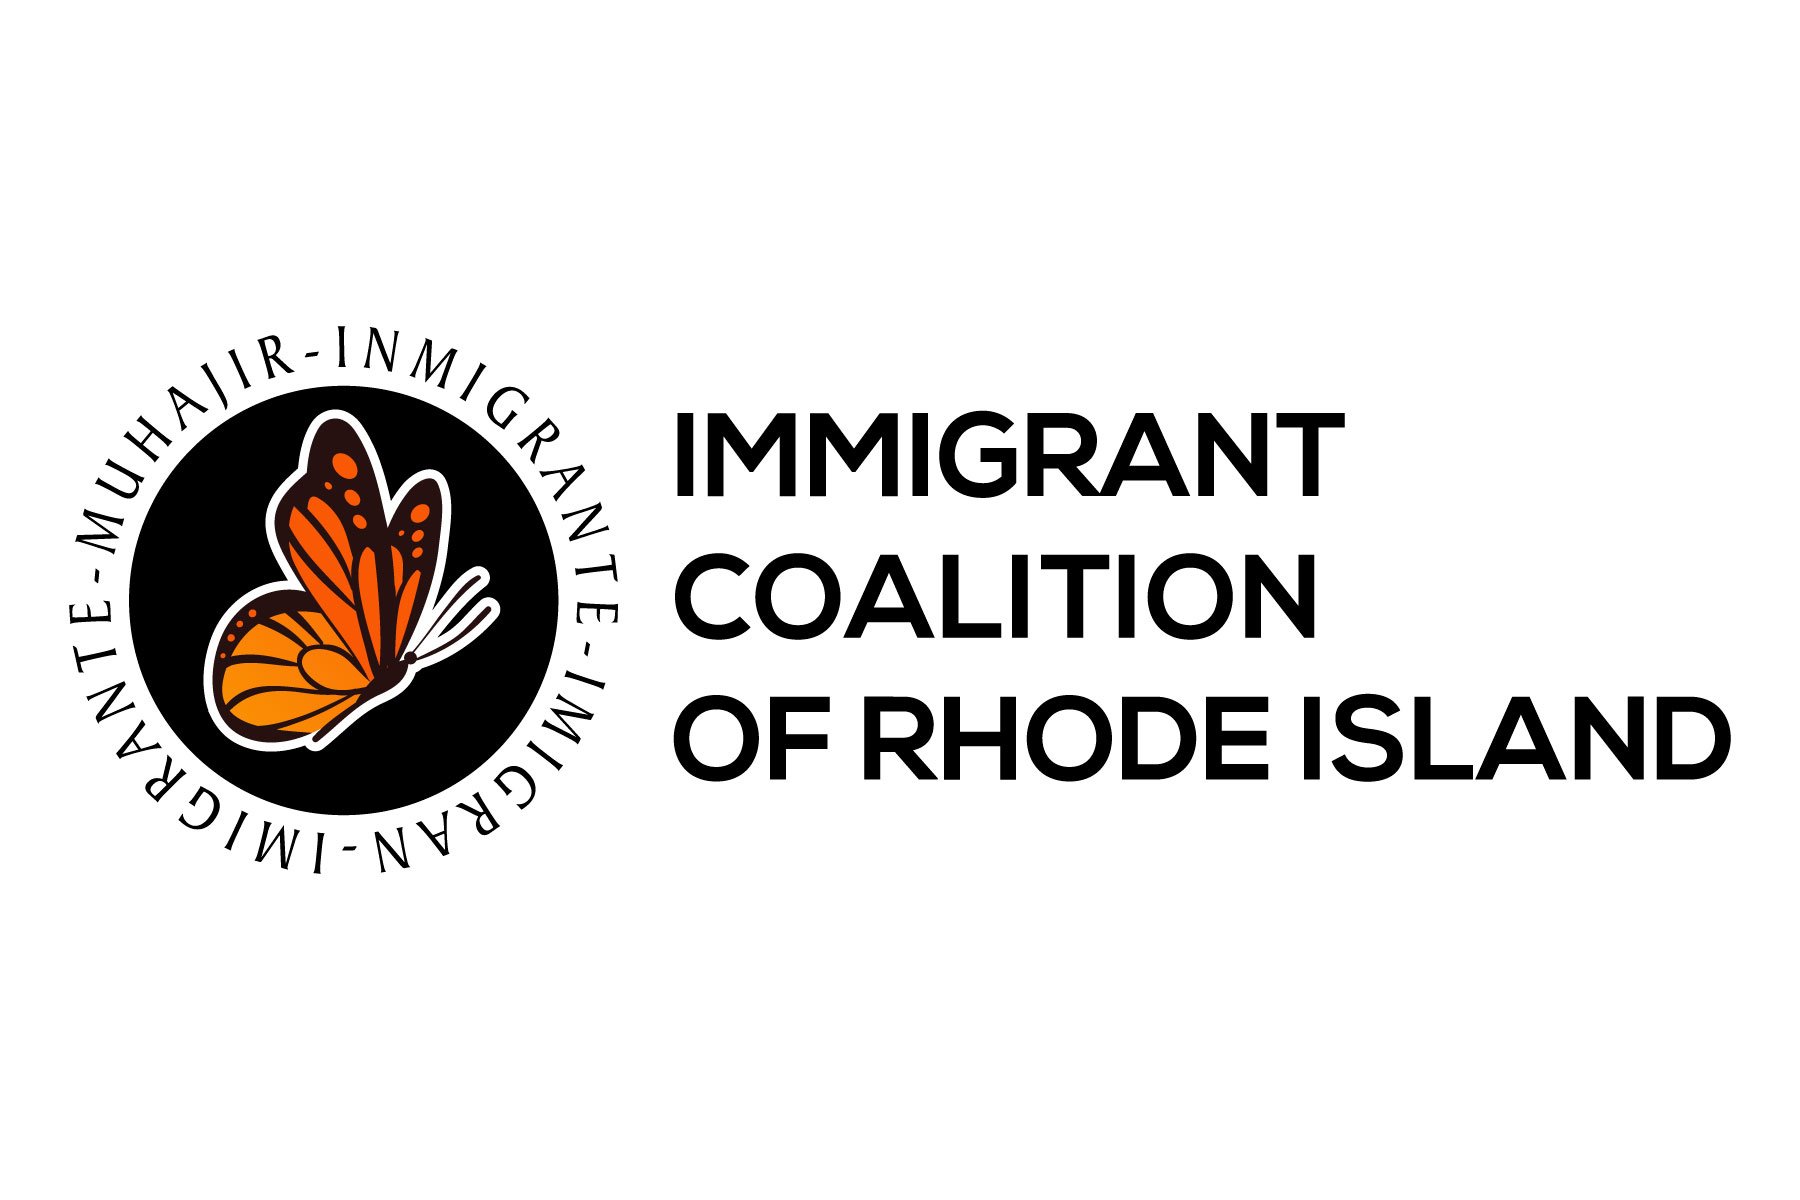 The Immigrant Coalition of Rhode Island